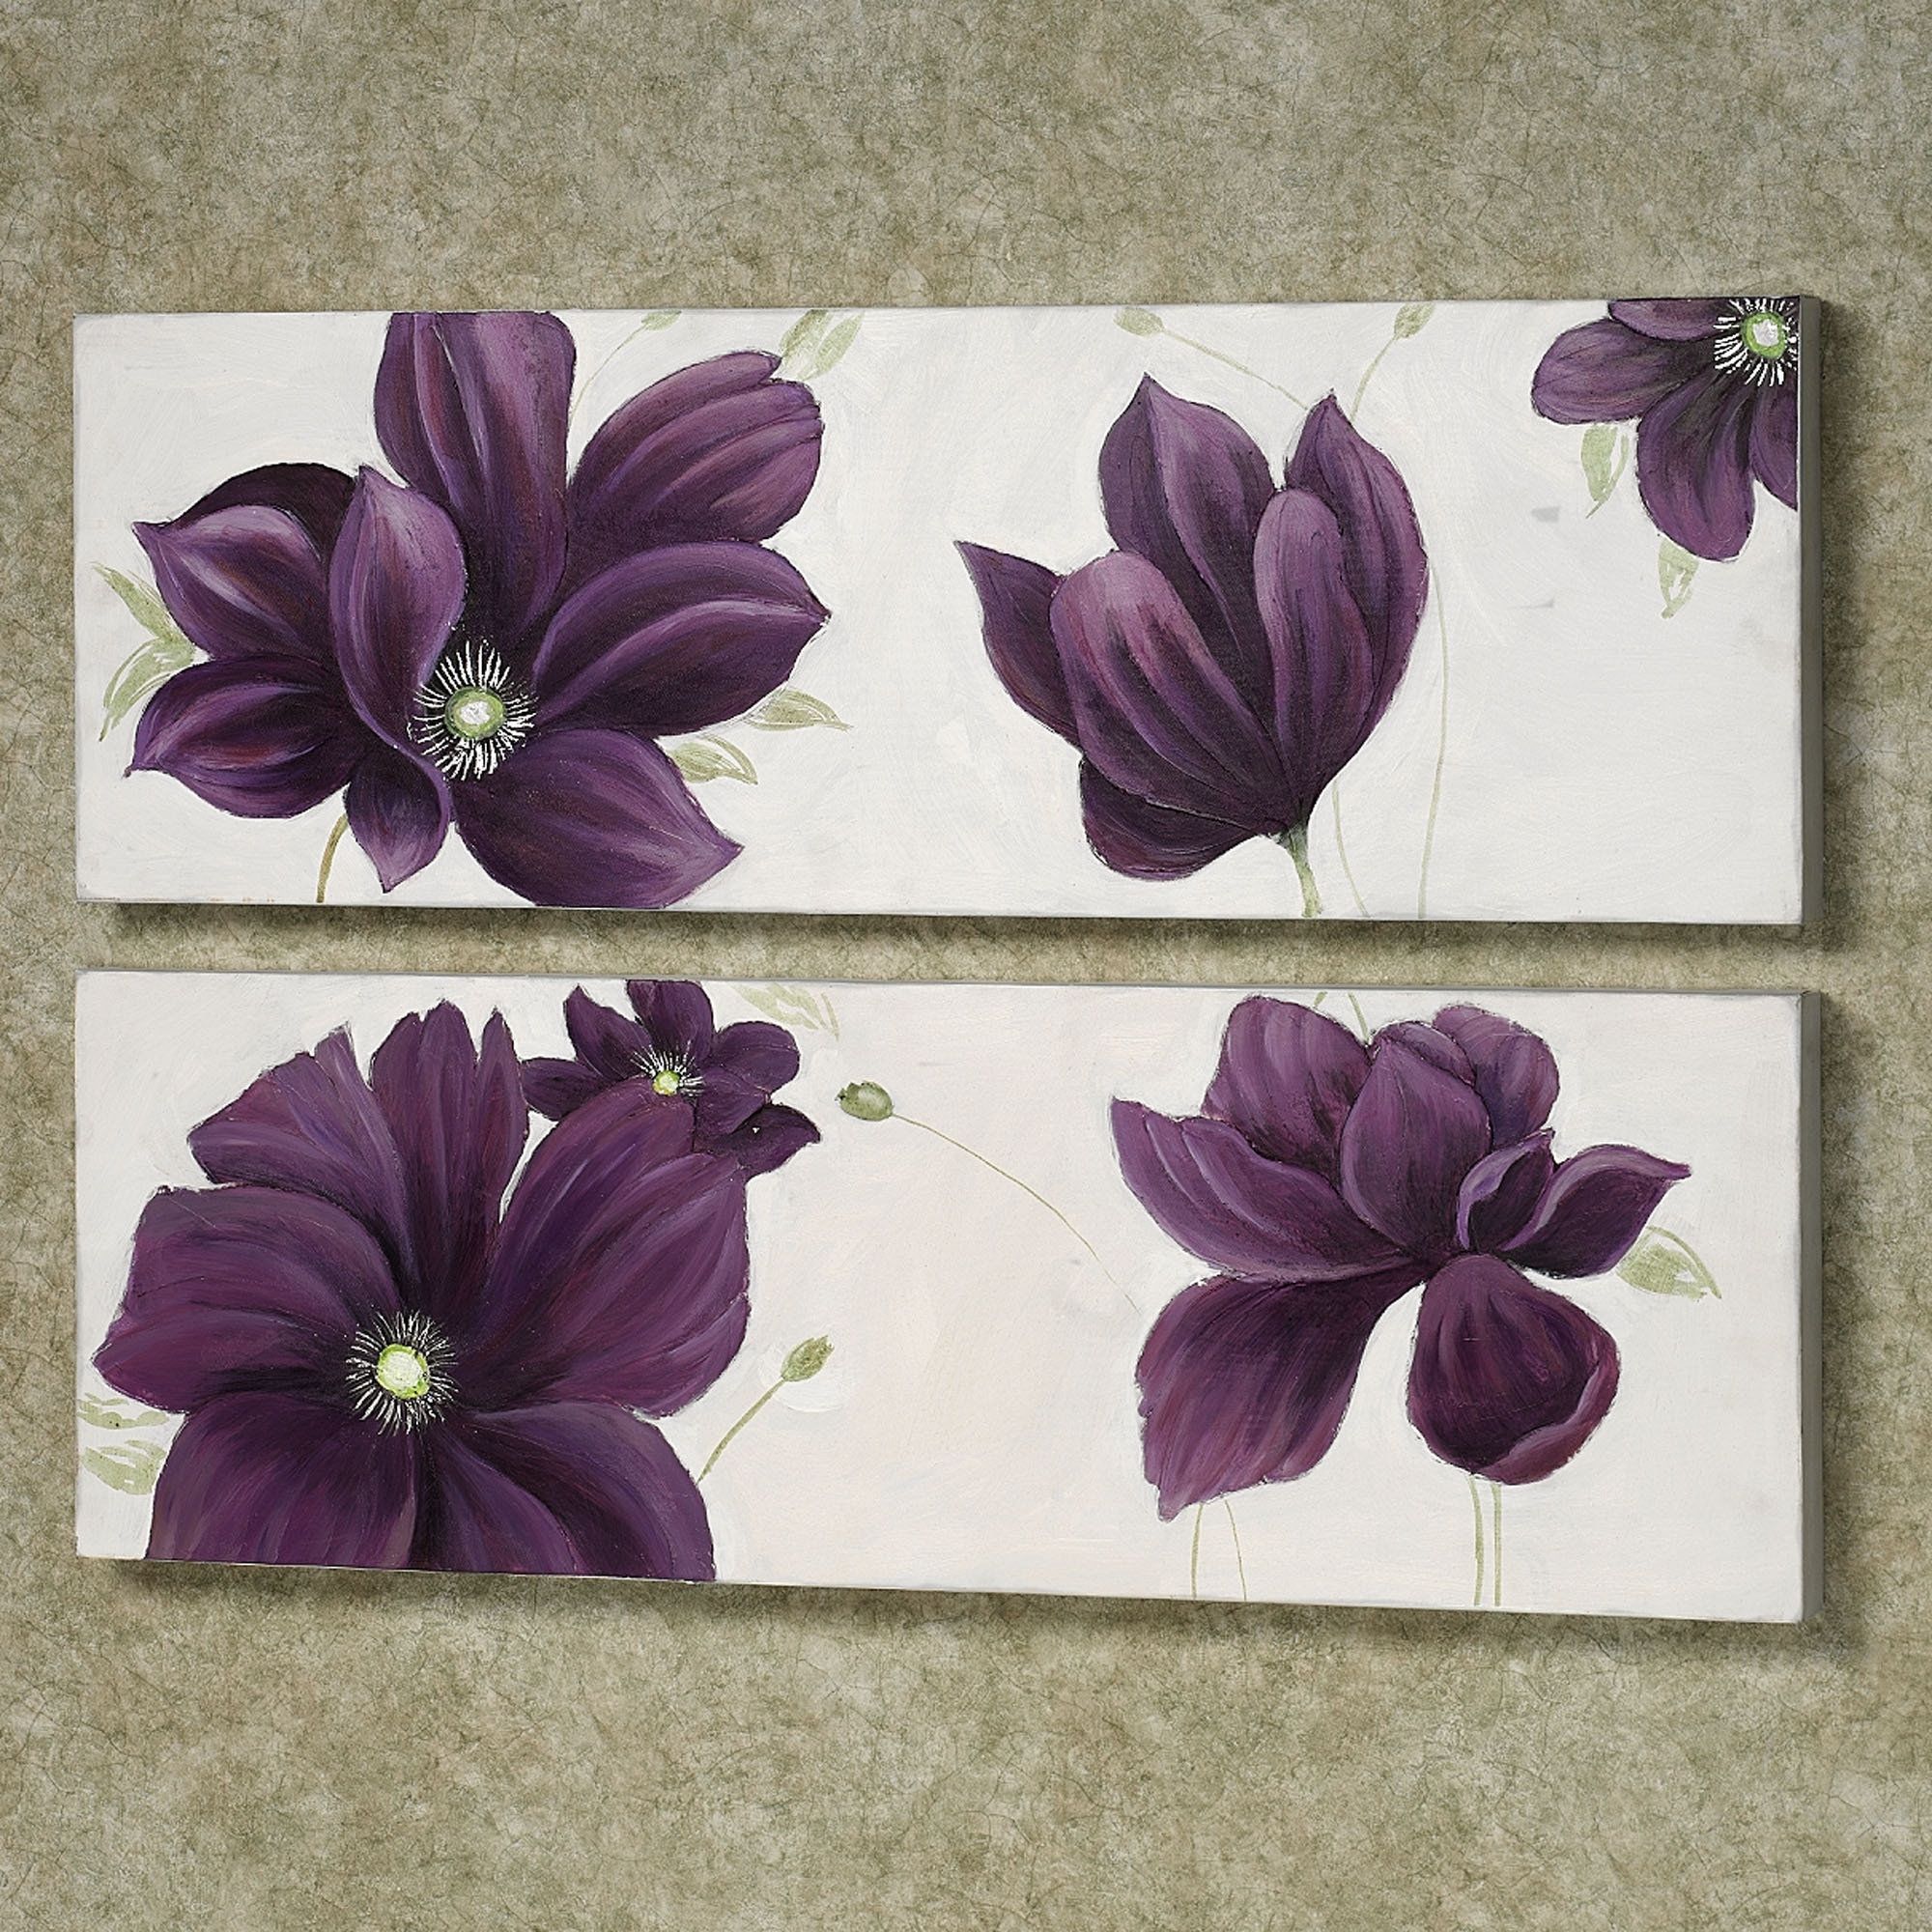 Crafty Ideas Purple And Gray Wall Art Home Decor Images About On With Purple And Grey Wall Art (View 12 of 20)